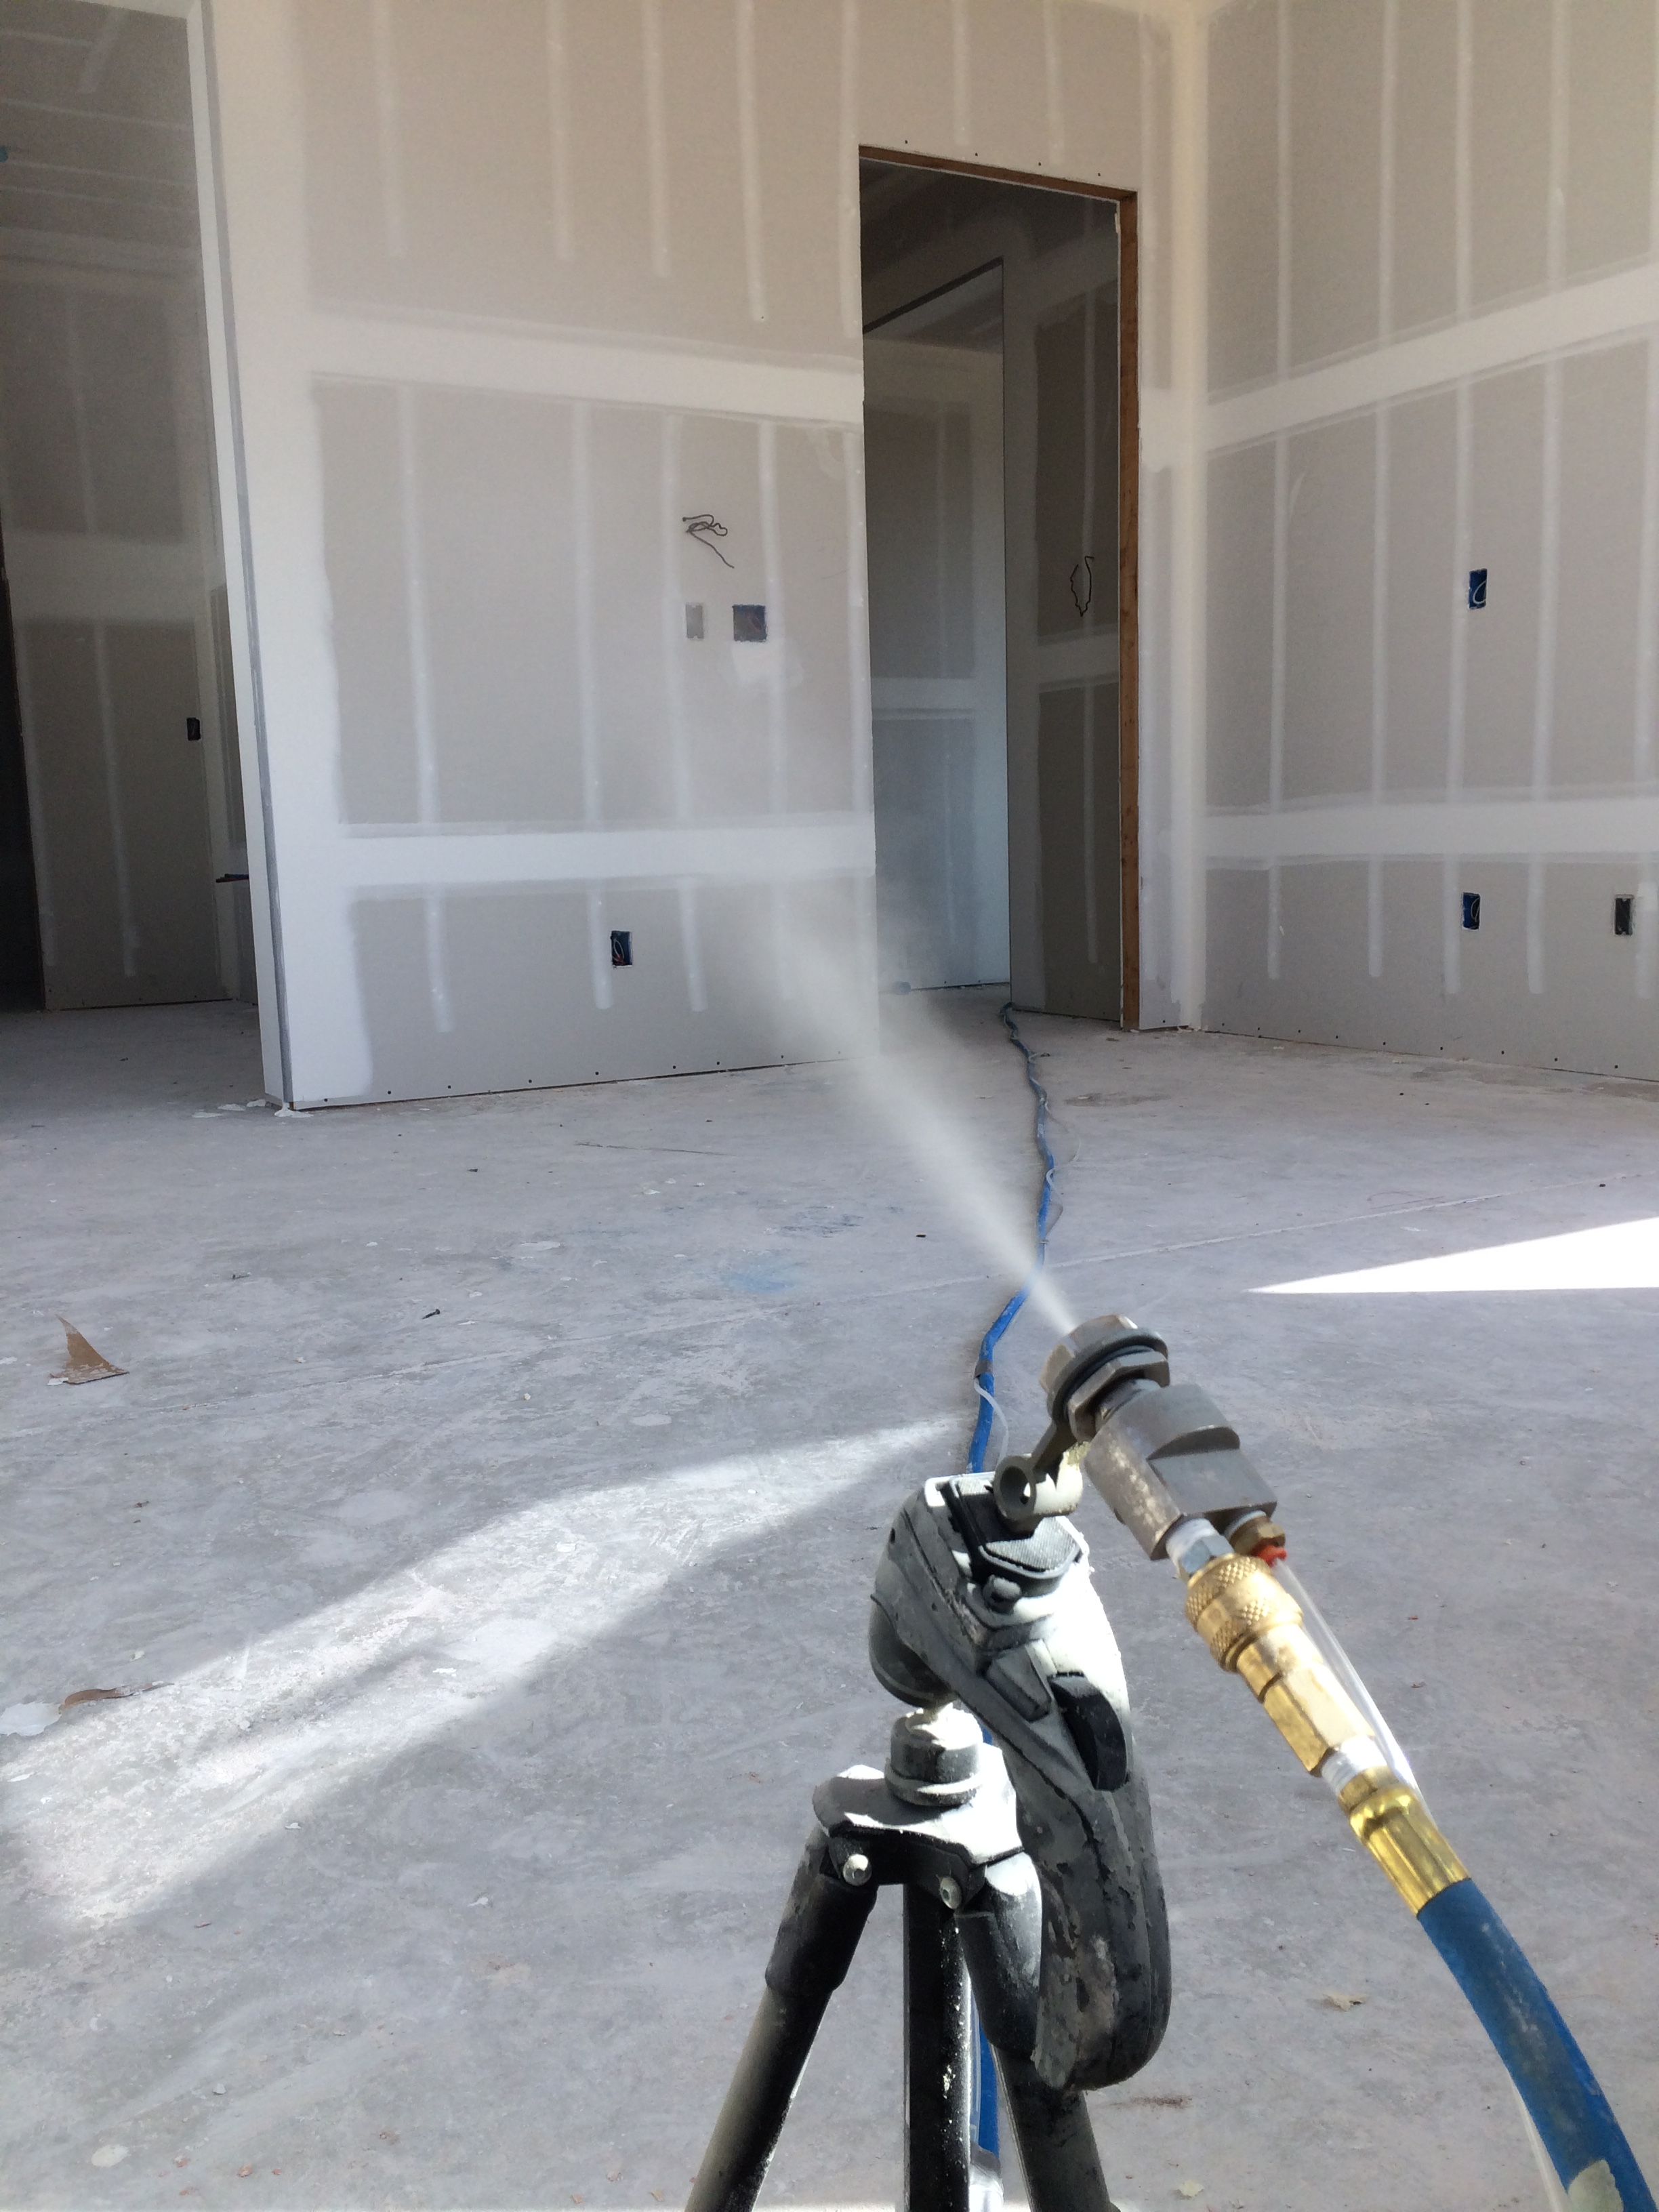 AeroBarrier is applied as an aerosol mist of sealant that seeks out and fills leaks throughout the entire building envelope.